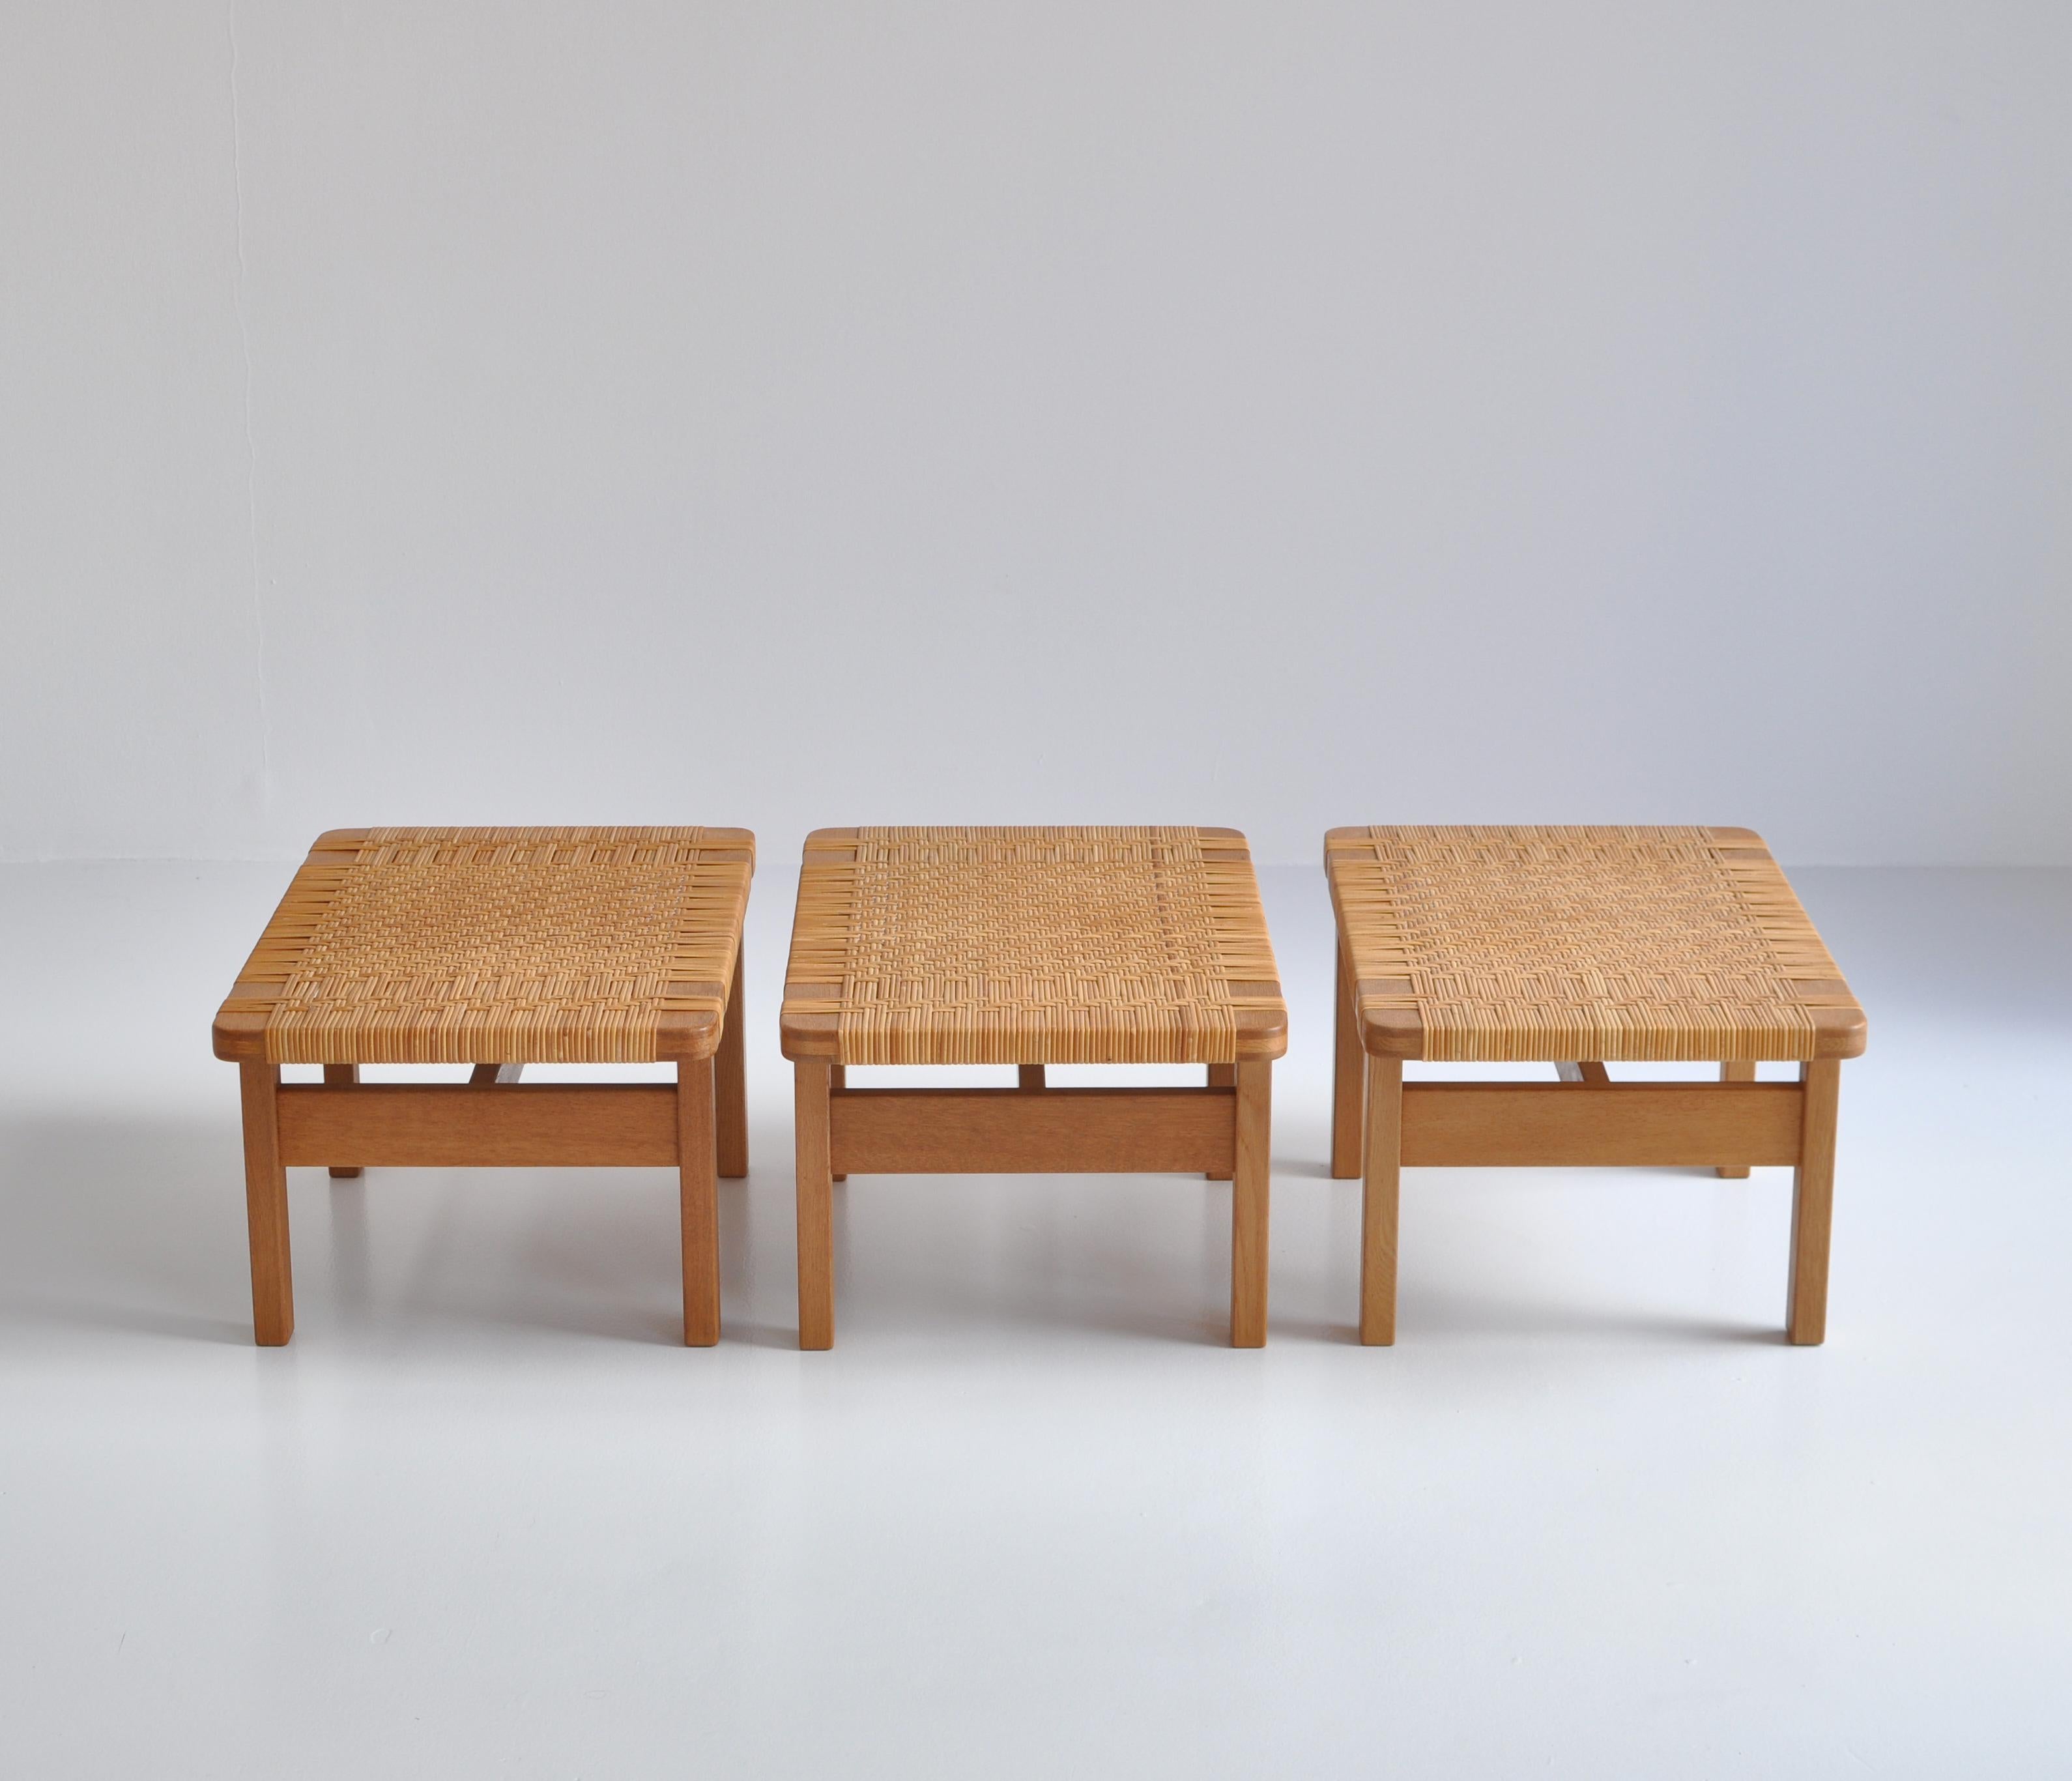 Borge Mogensen Side Tables or Benches in Oak and Rattan Cane, 1950s, Denmark 7